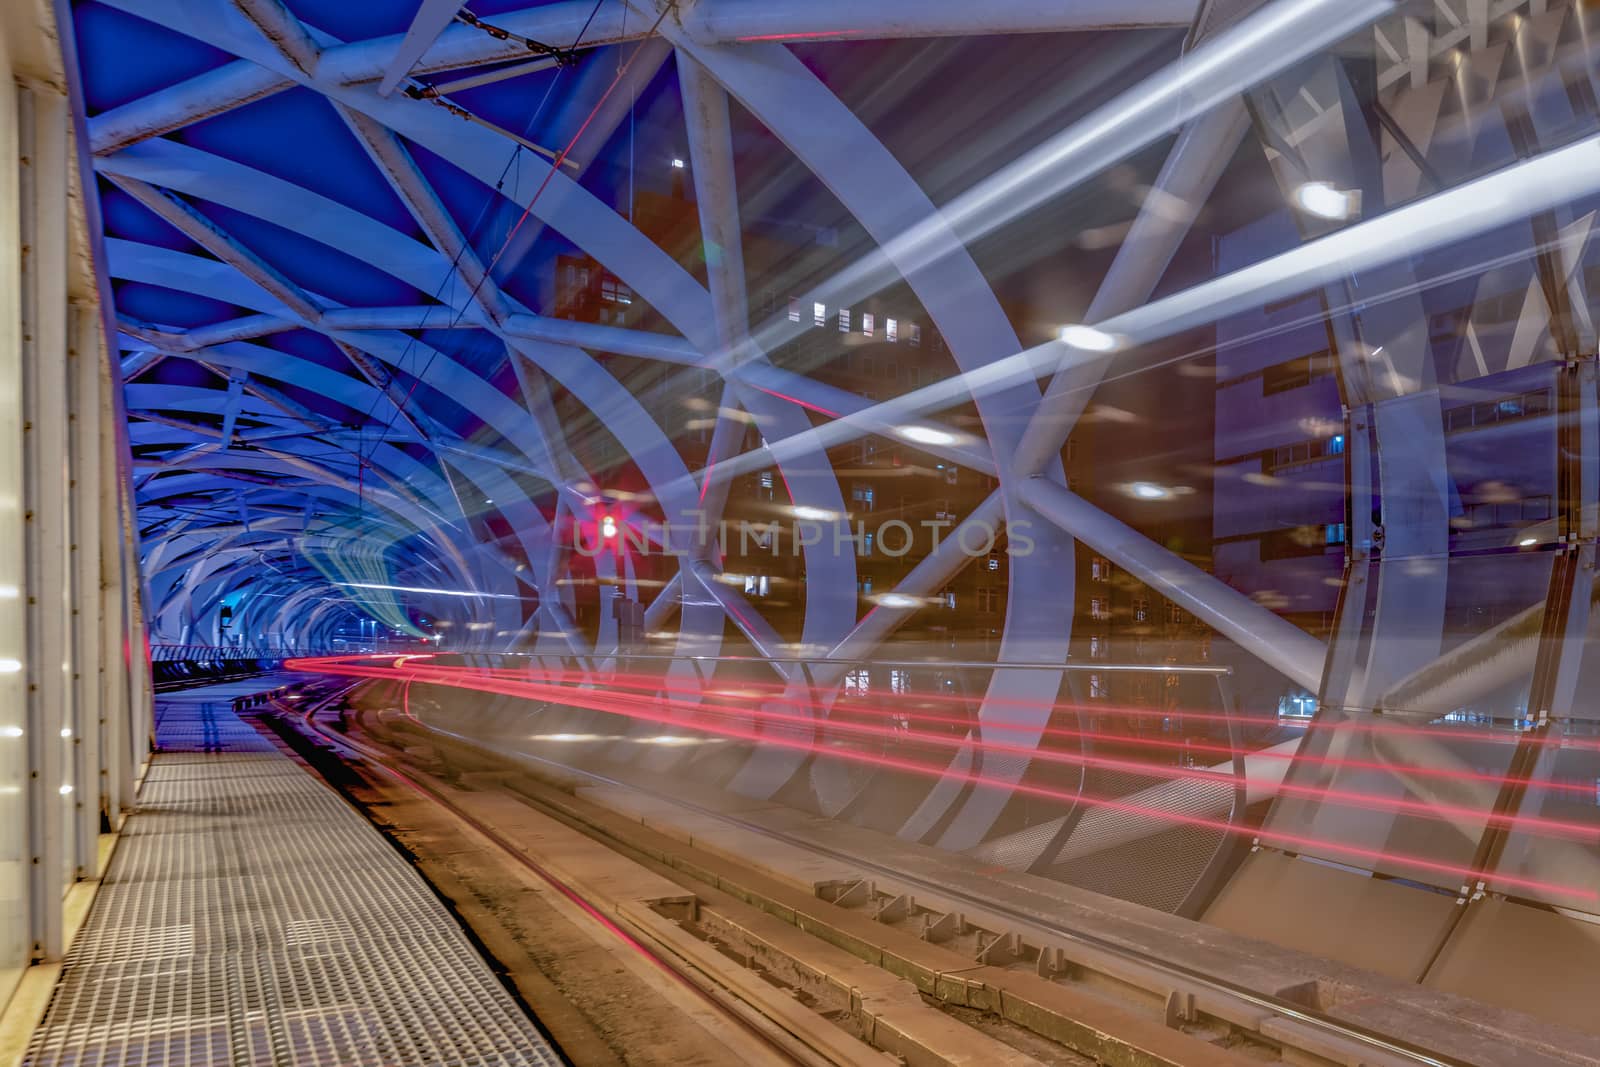 Long exposure of a tram leaving BeatrixKwartier tram station platform to the next station in The Hague, Netherlands by ankorlight